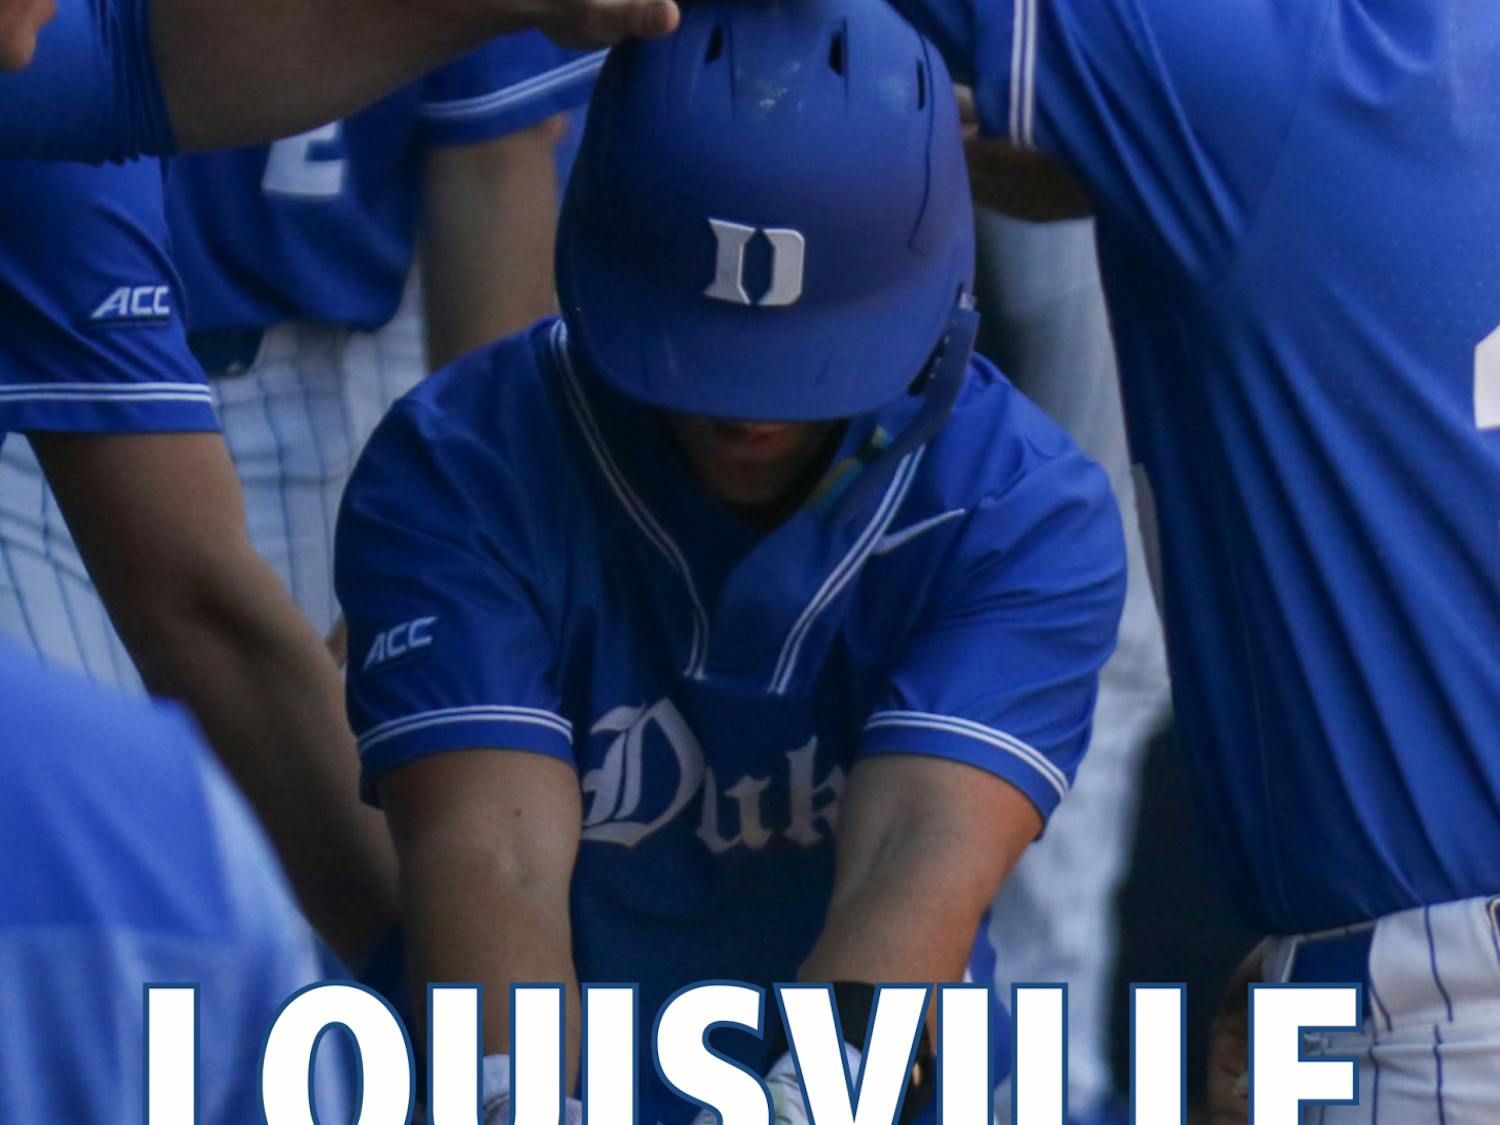 Duke baseball sophomore Alex Mooney celebrates with his team after sweeping a series with Louisville over the weekend.